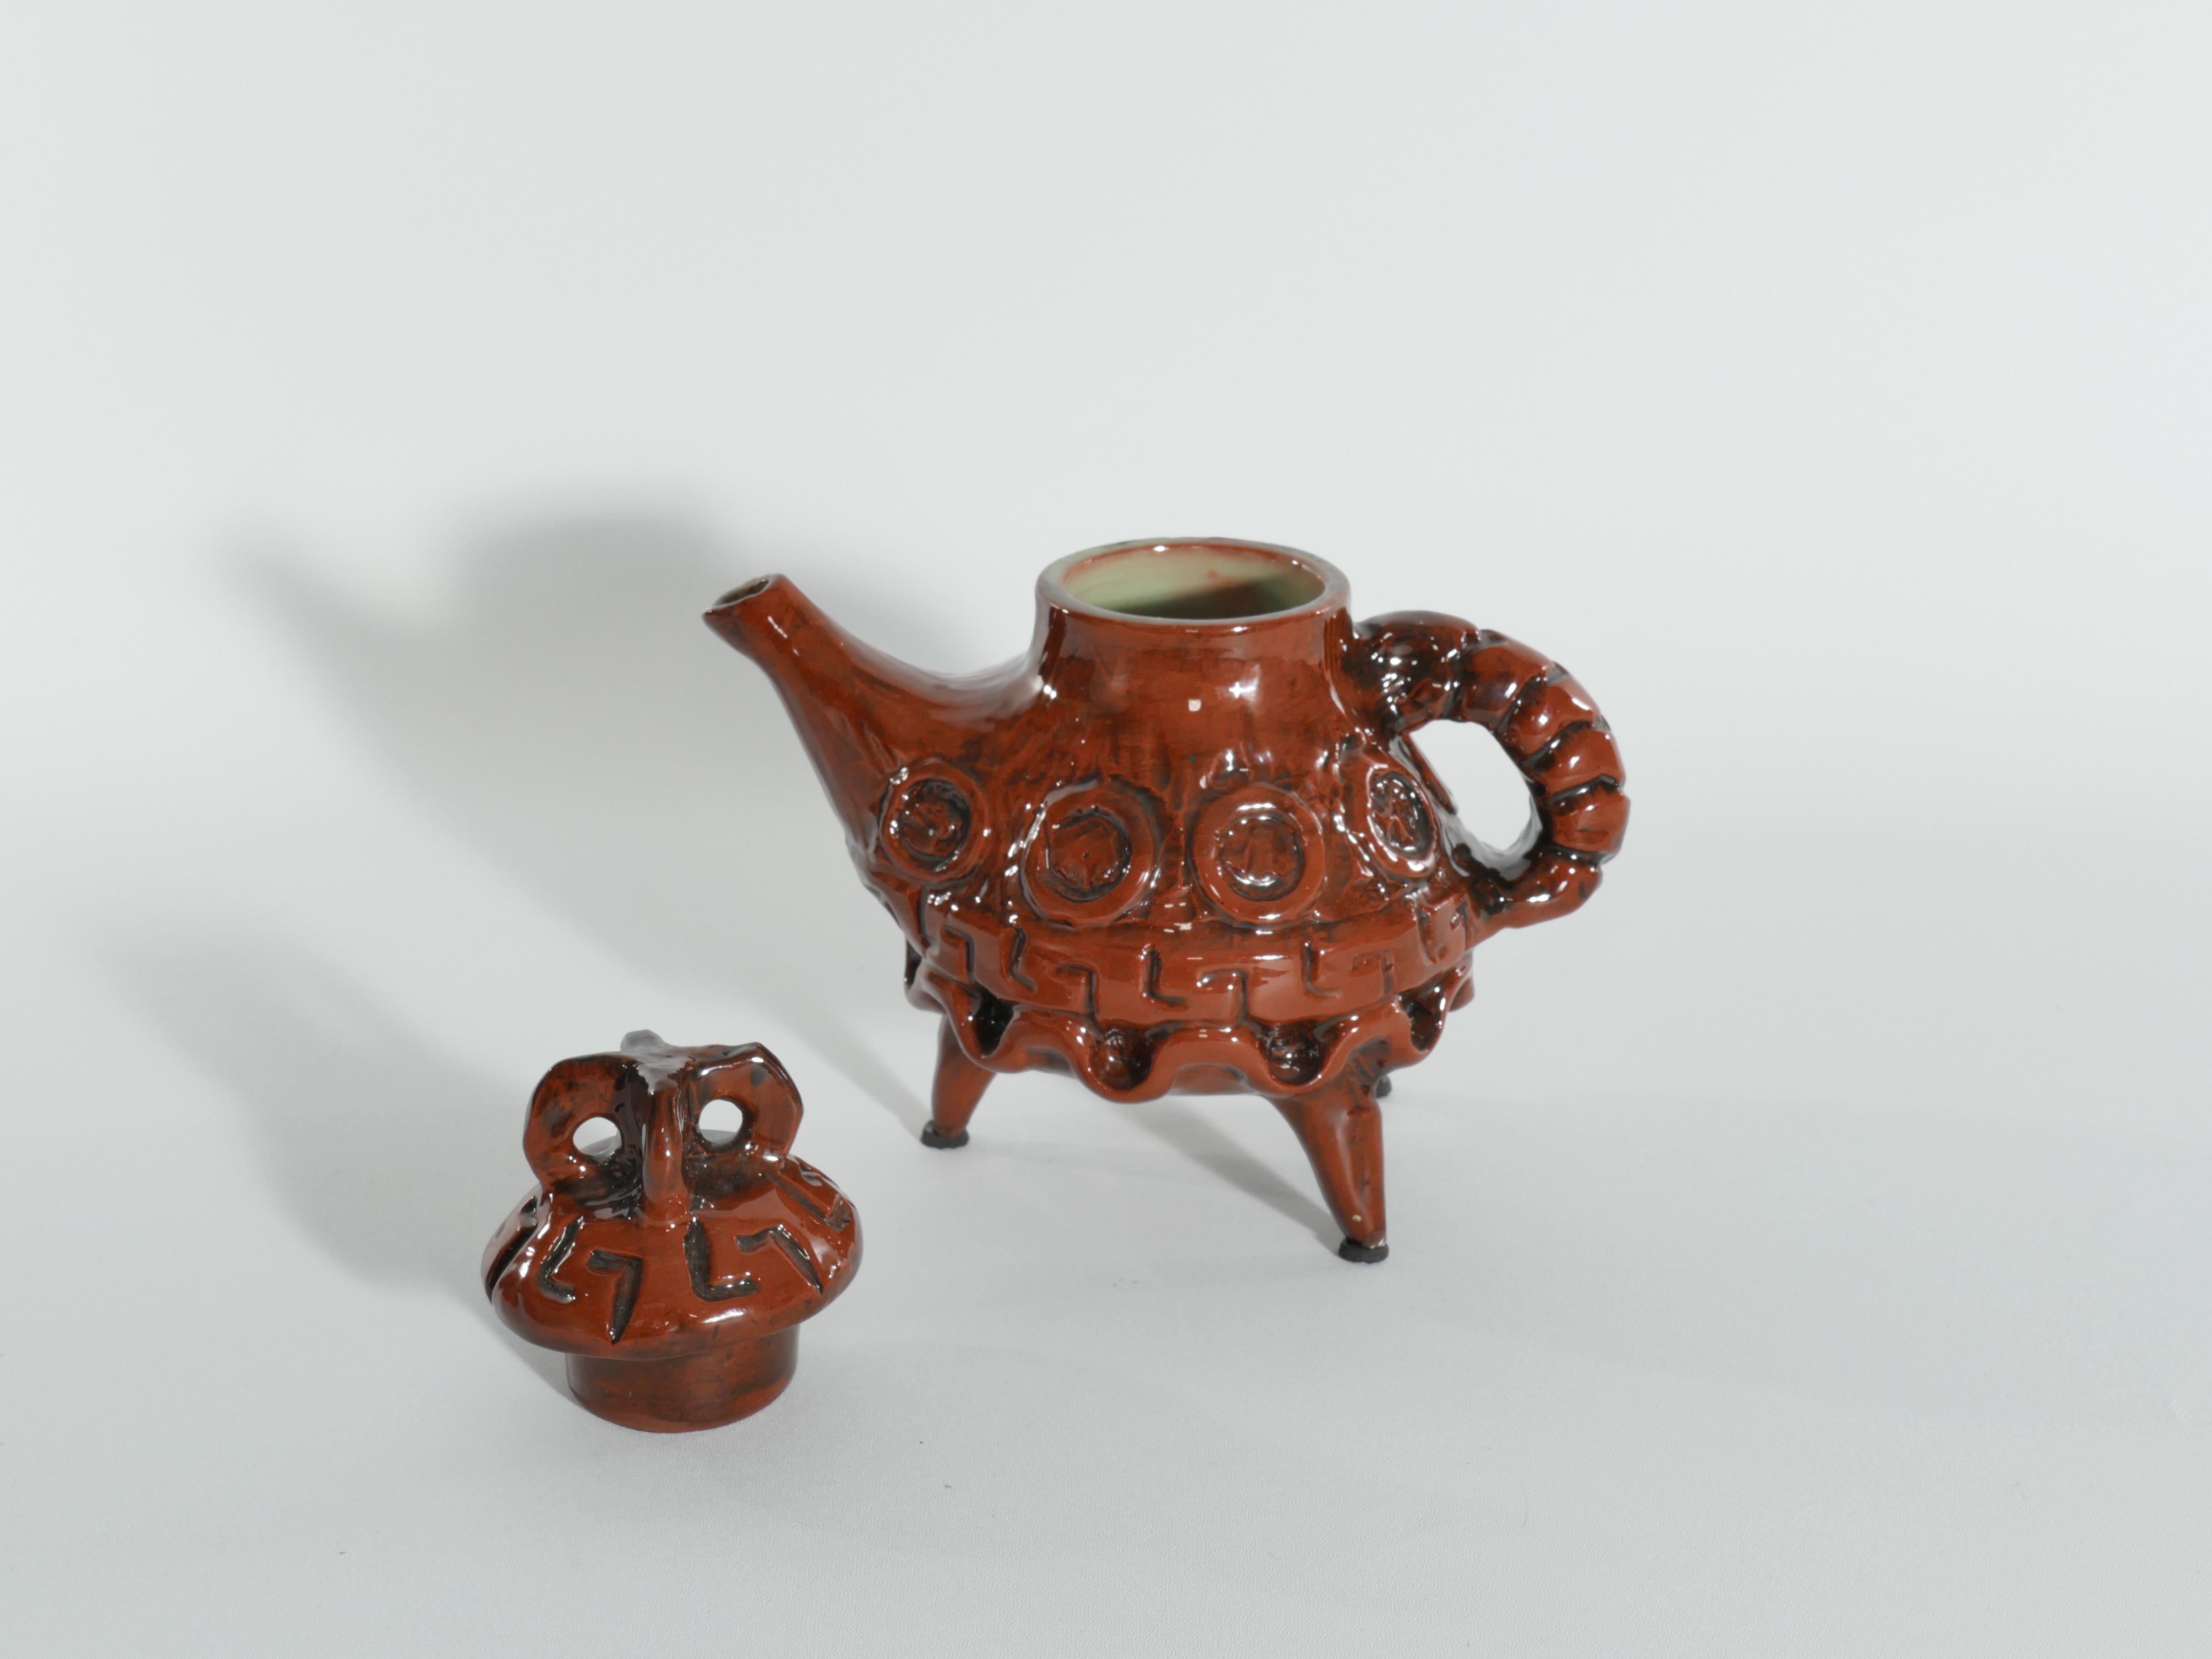 Vintage Playful Teapot with Crab-like Features by Allan Hellman Sweden 1982  For Sale 1